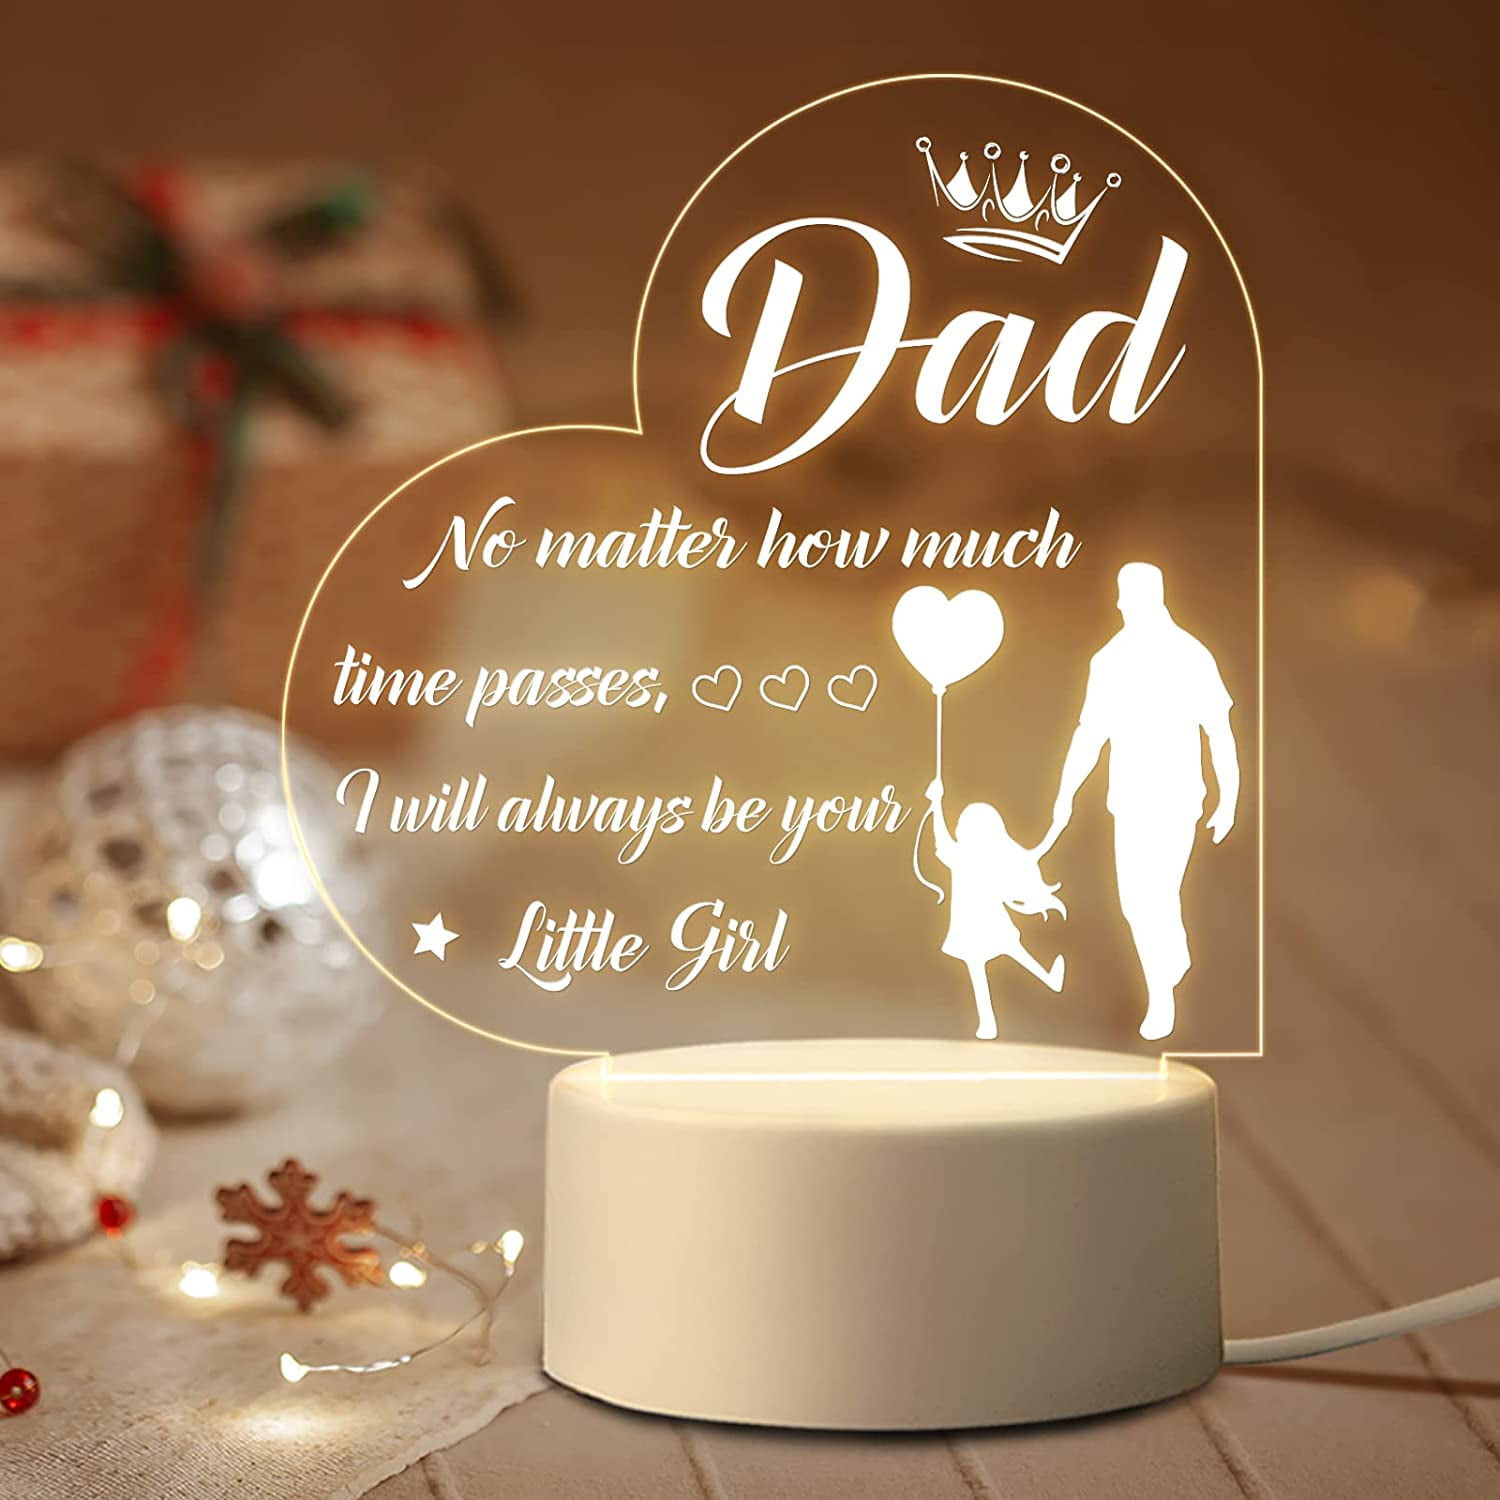 Personalized Acrylic Sleep Night Light - Dad Gifts from Daughter 